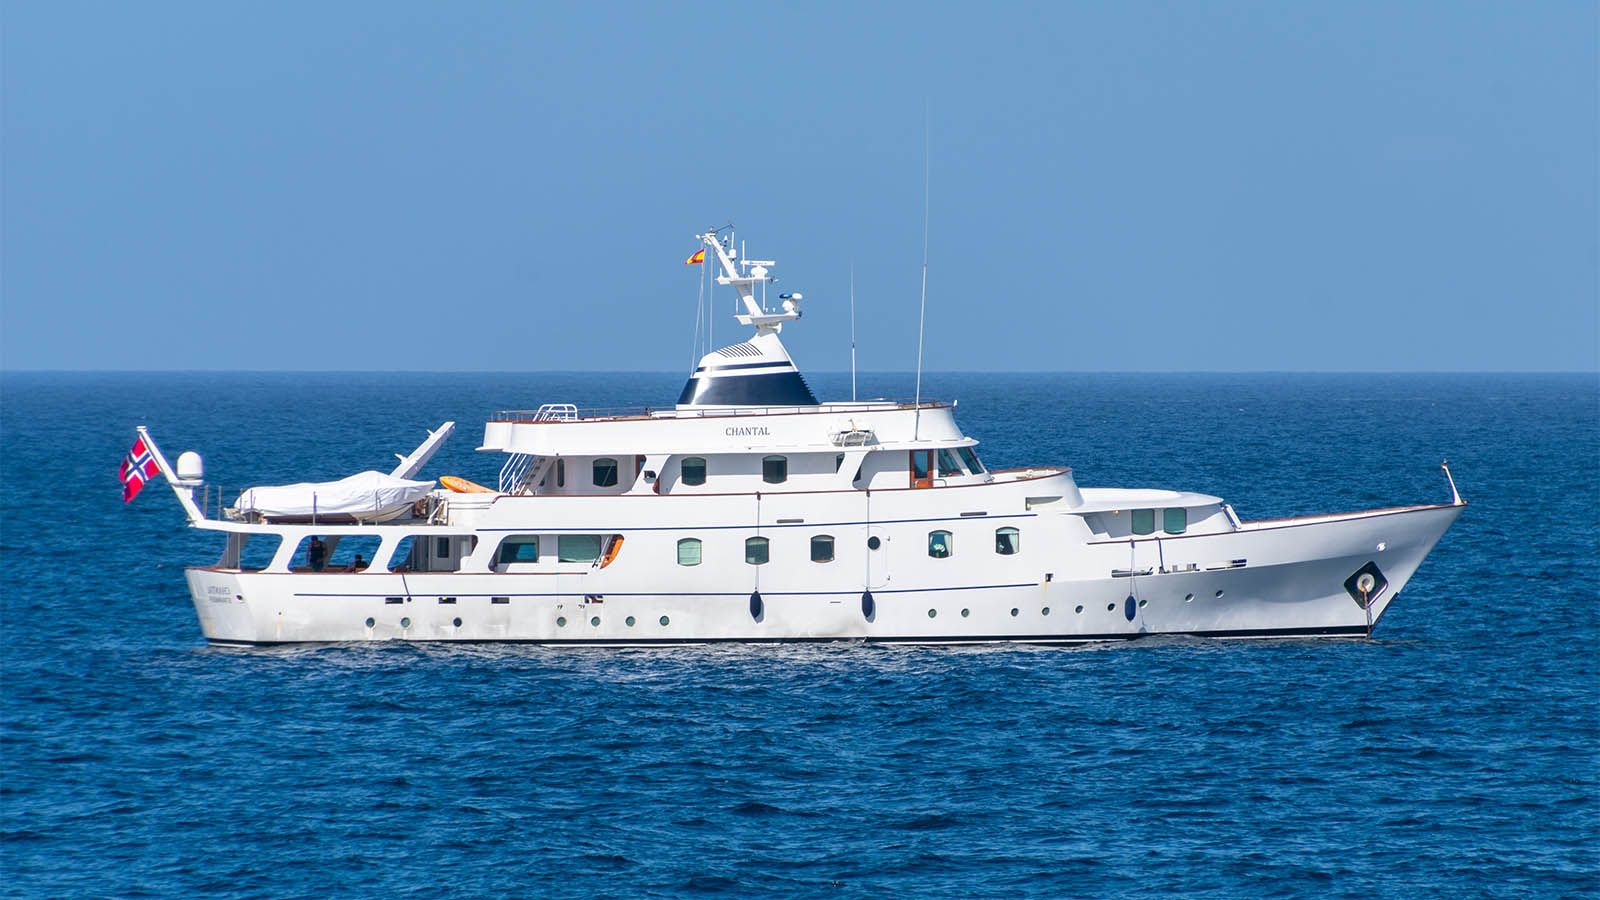 120' 7''/36.75m Global Engineering CHANTAL for Sale with IYC